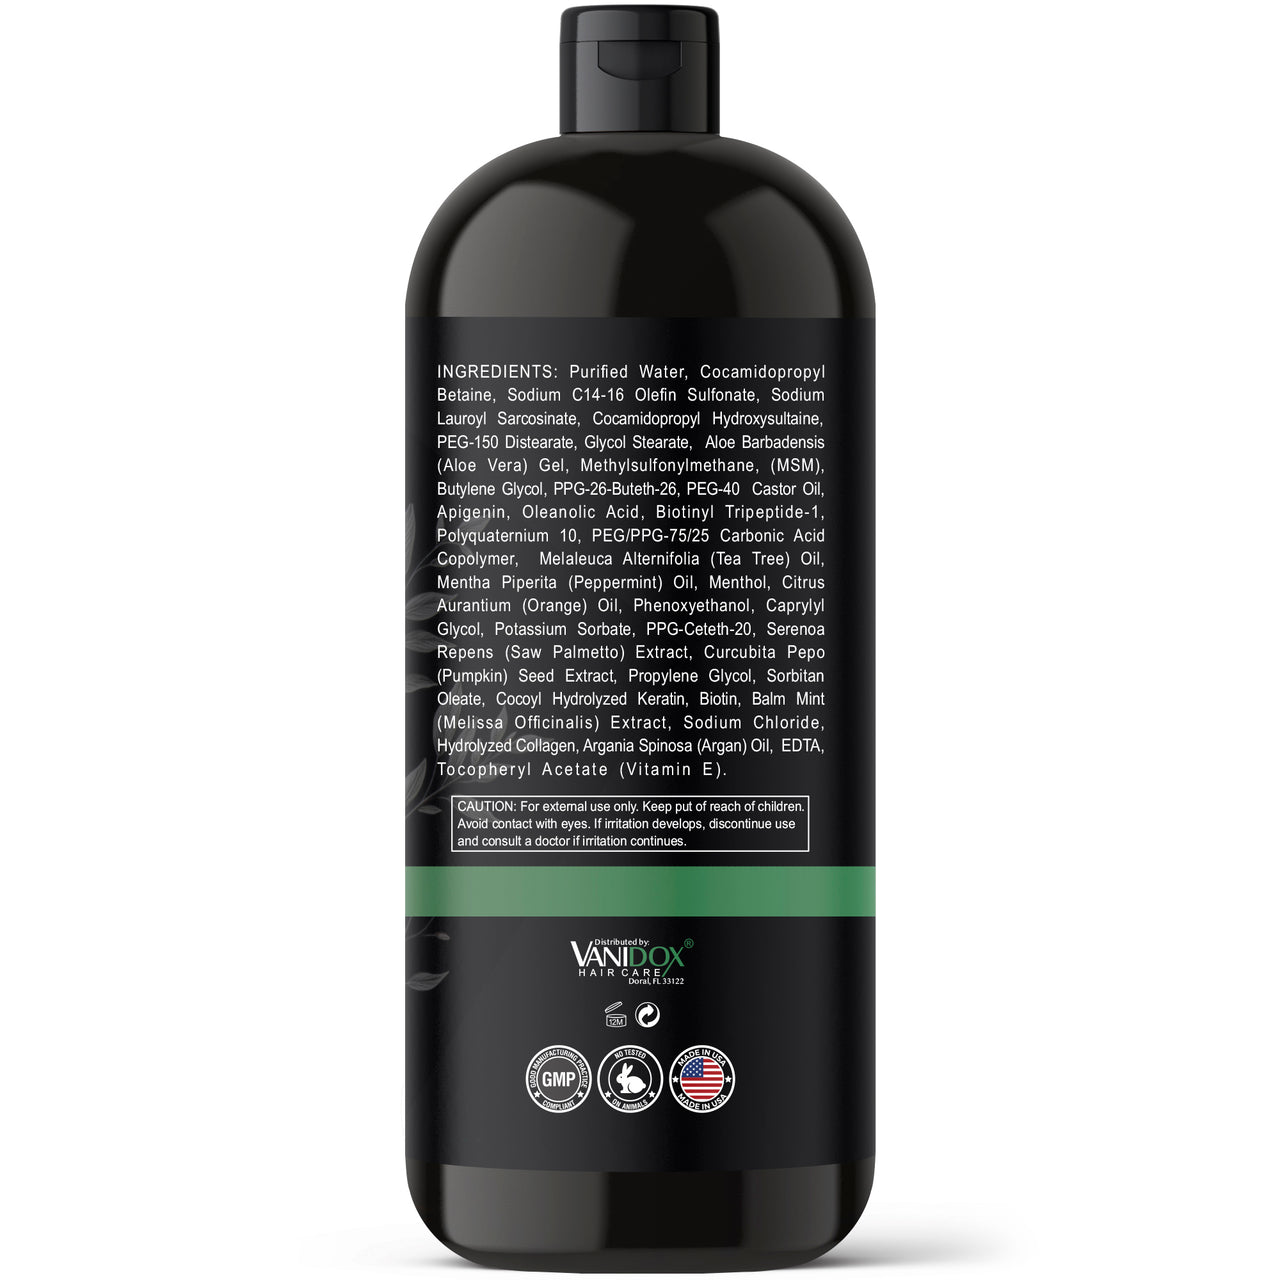 Shampoo For Men with Organic Tea Tree Oil and Carbonic Acid - Formulated For Itchy and Dry Scalp, Fights Hair Loss and Stimulates Hair Growth (16 FL Oz)